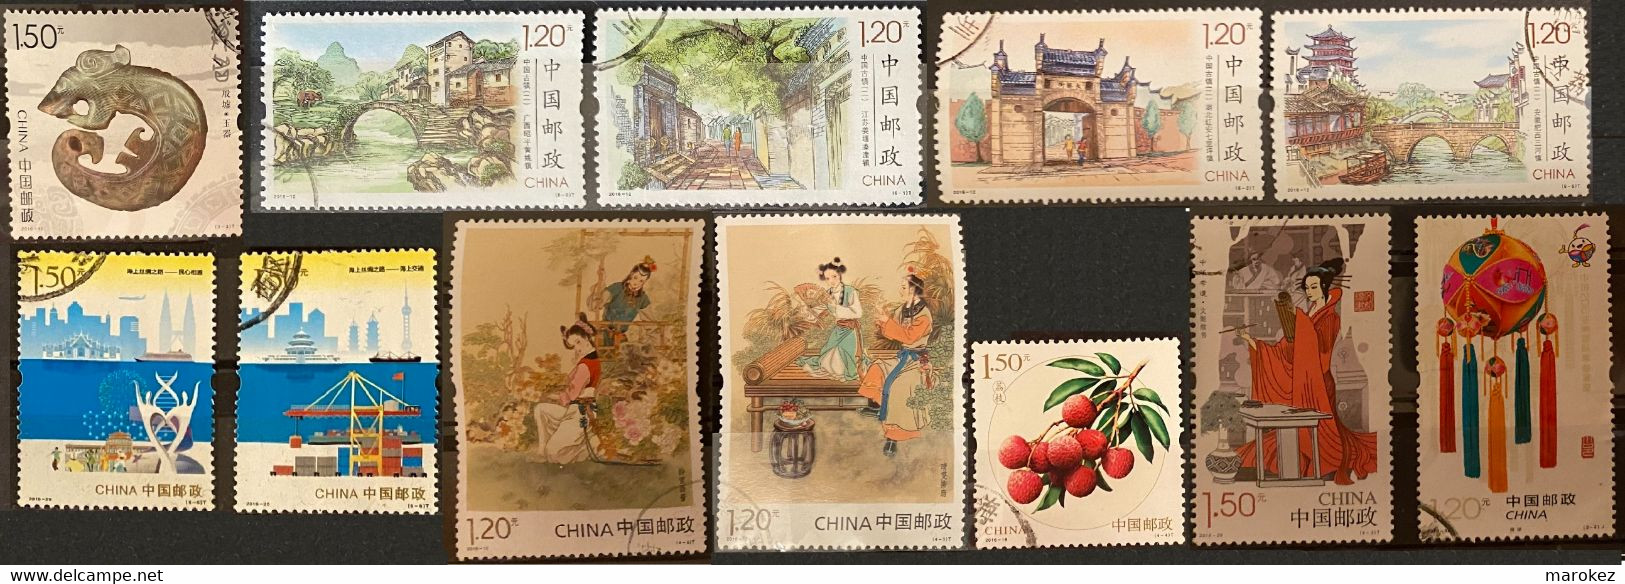 CHINA PRC 2016 12 Postally Used Stamps MICHEL # 4789-90,4793-94,4800-01,4809,4813,4835-36,4841,4861 - Oblitérés